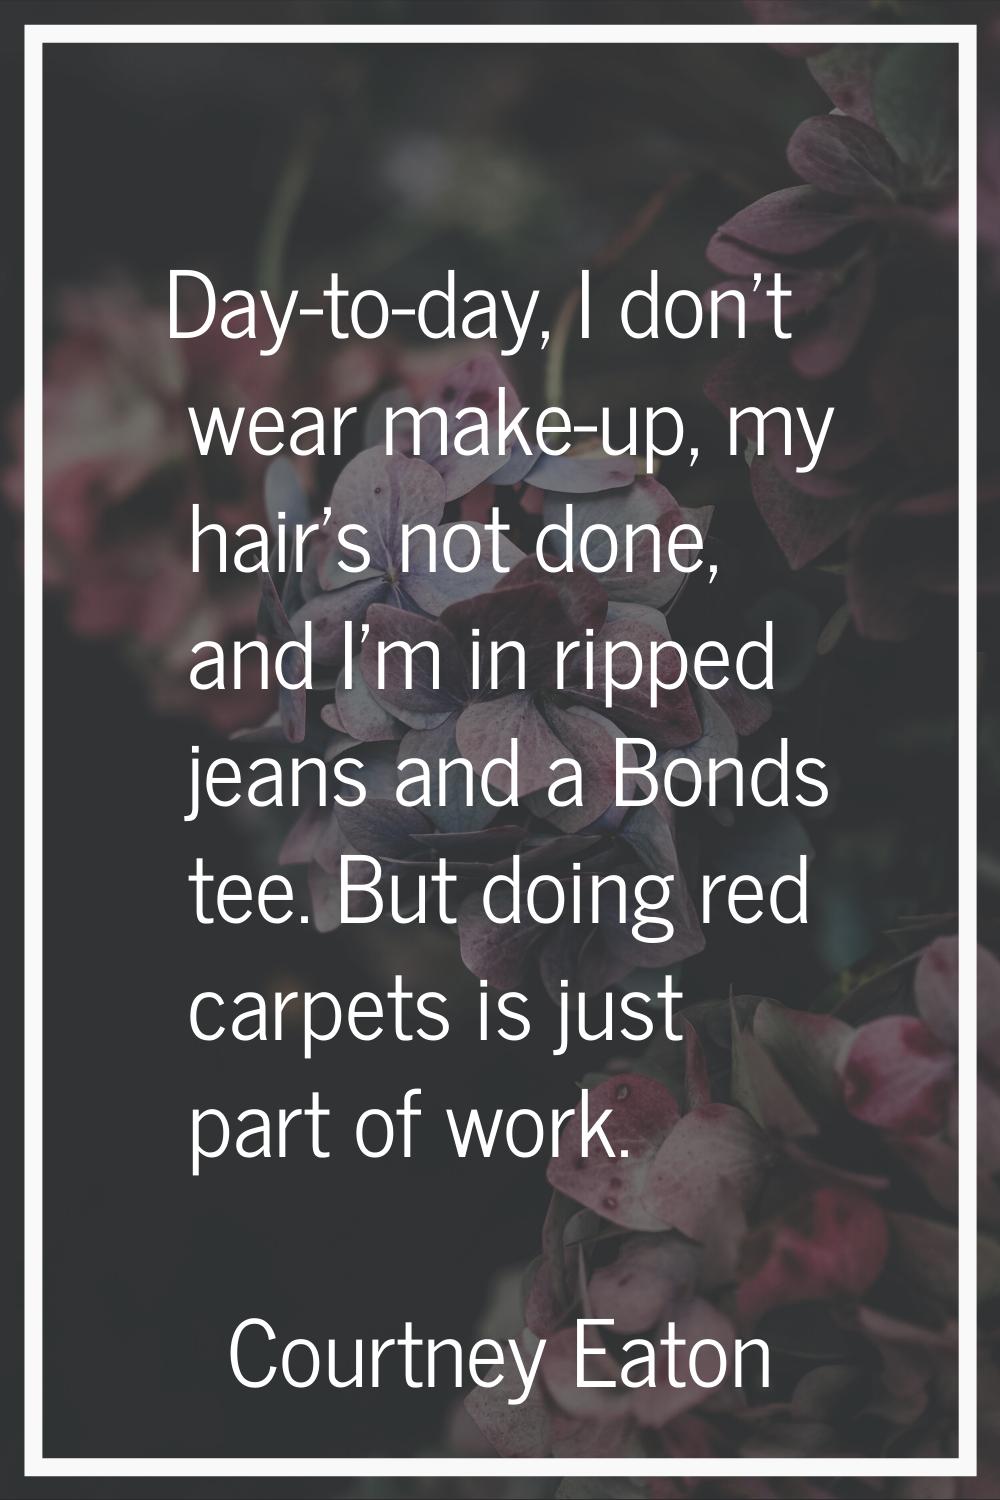 Day-to-day, I don't wear make-up, my hair's not done, and I'm in ripped jeans and a Bonds tee. But 